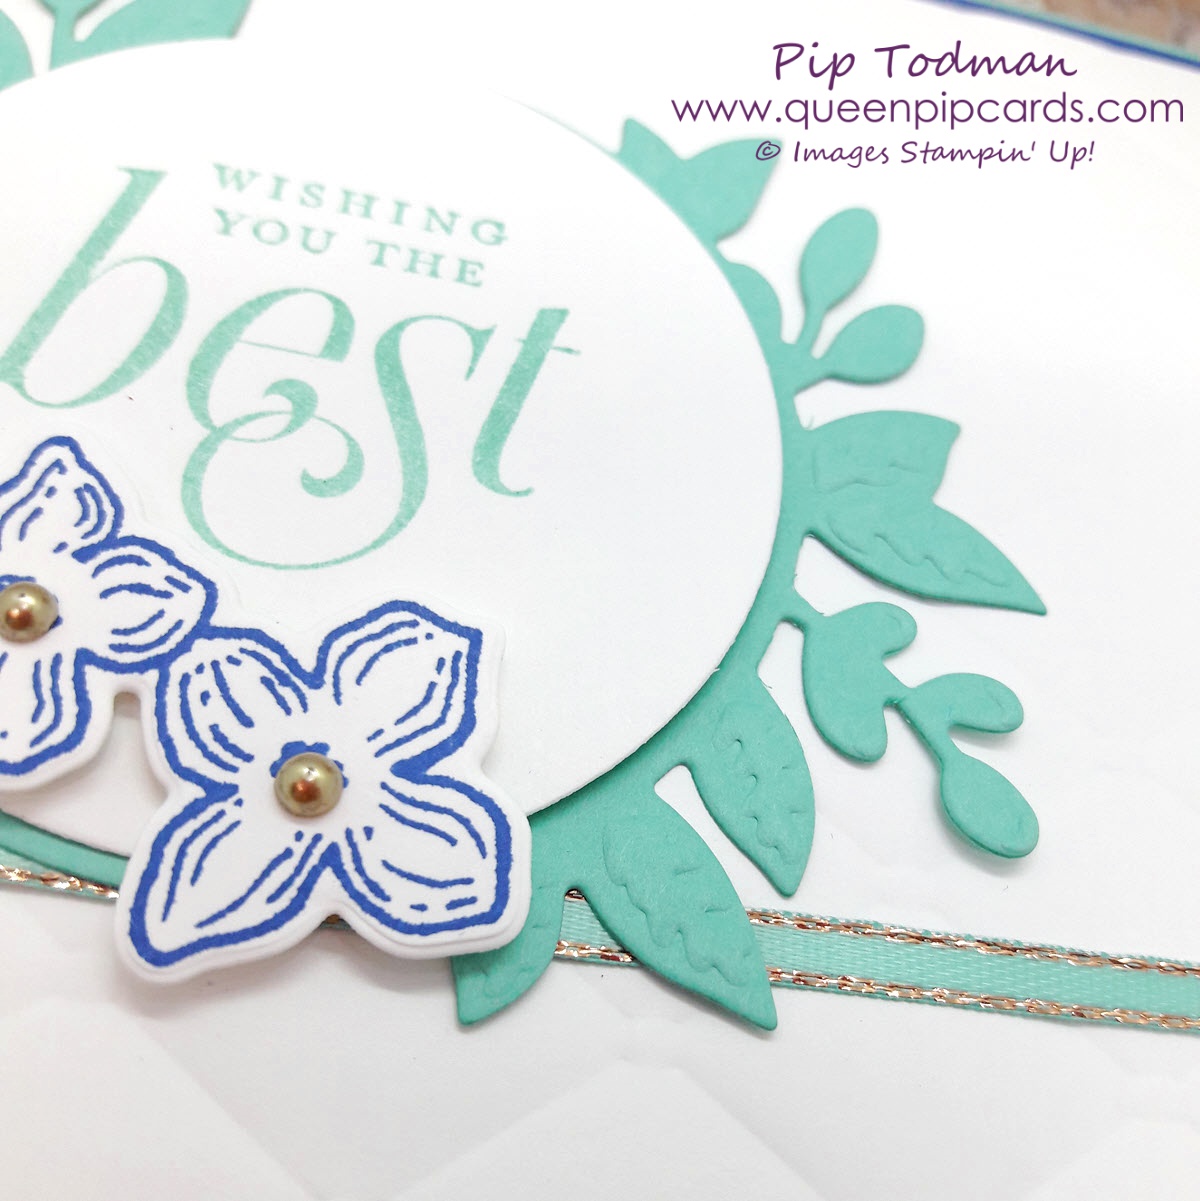 Get Floral With Foliage Frame Framelits from Stampin’ Up!